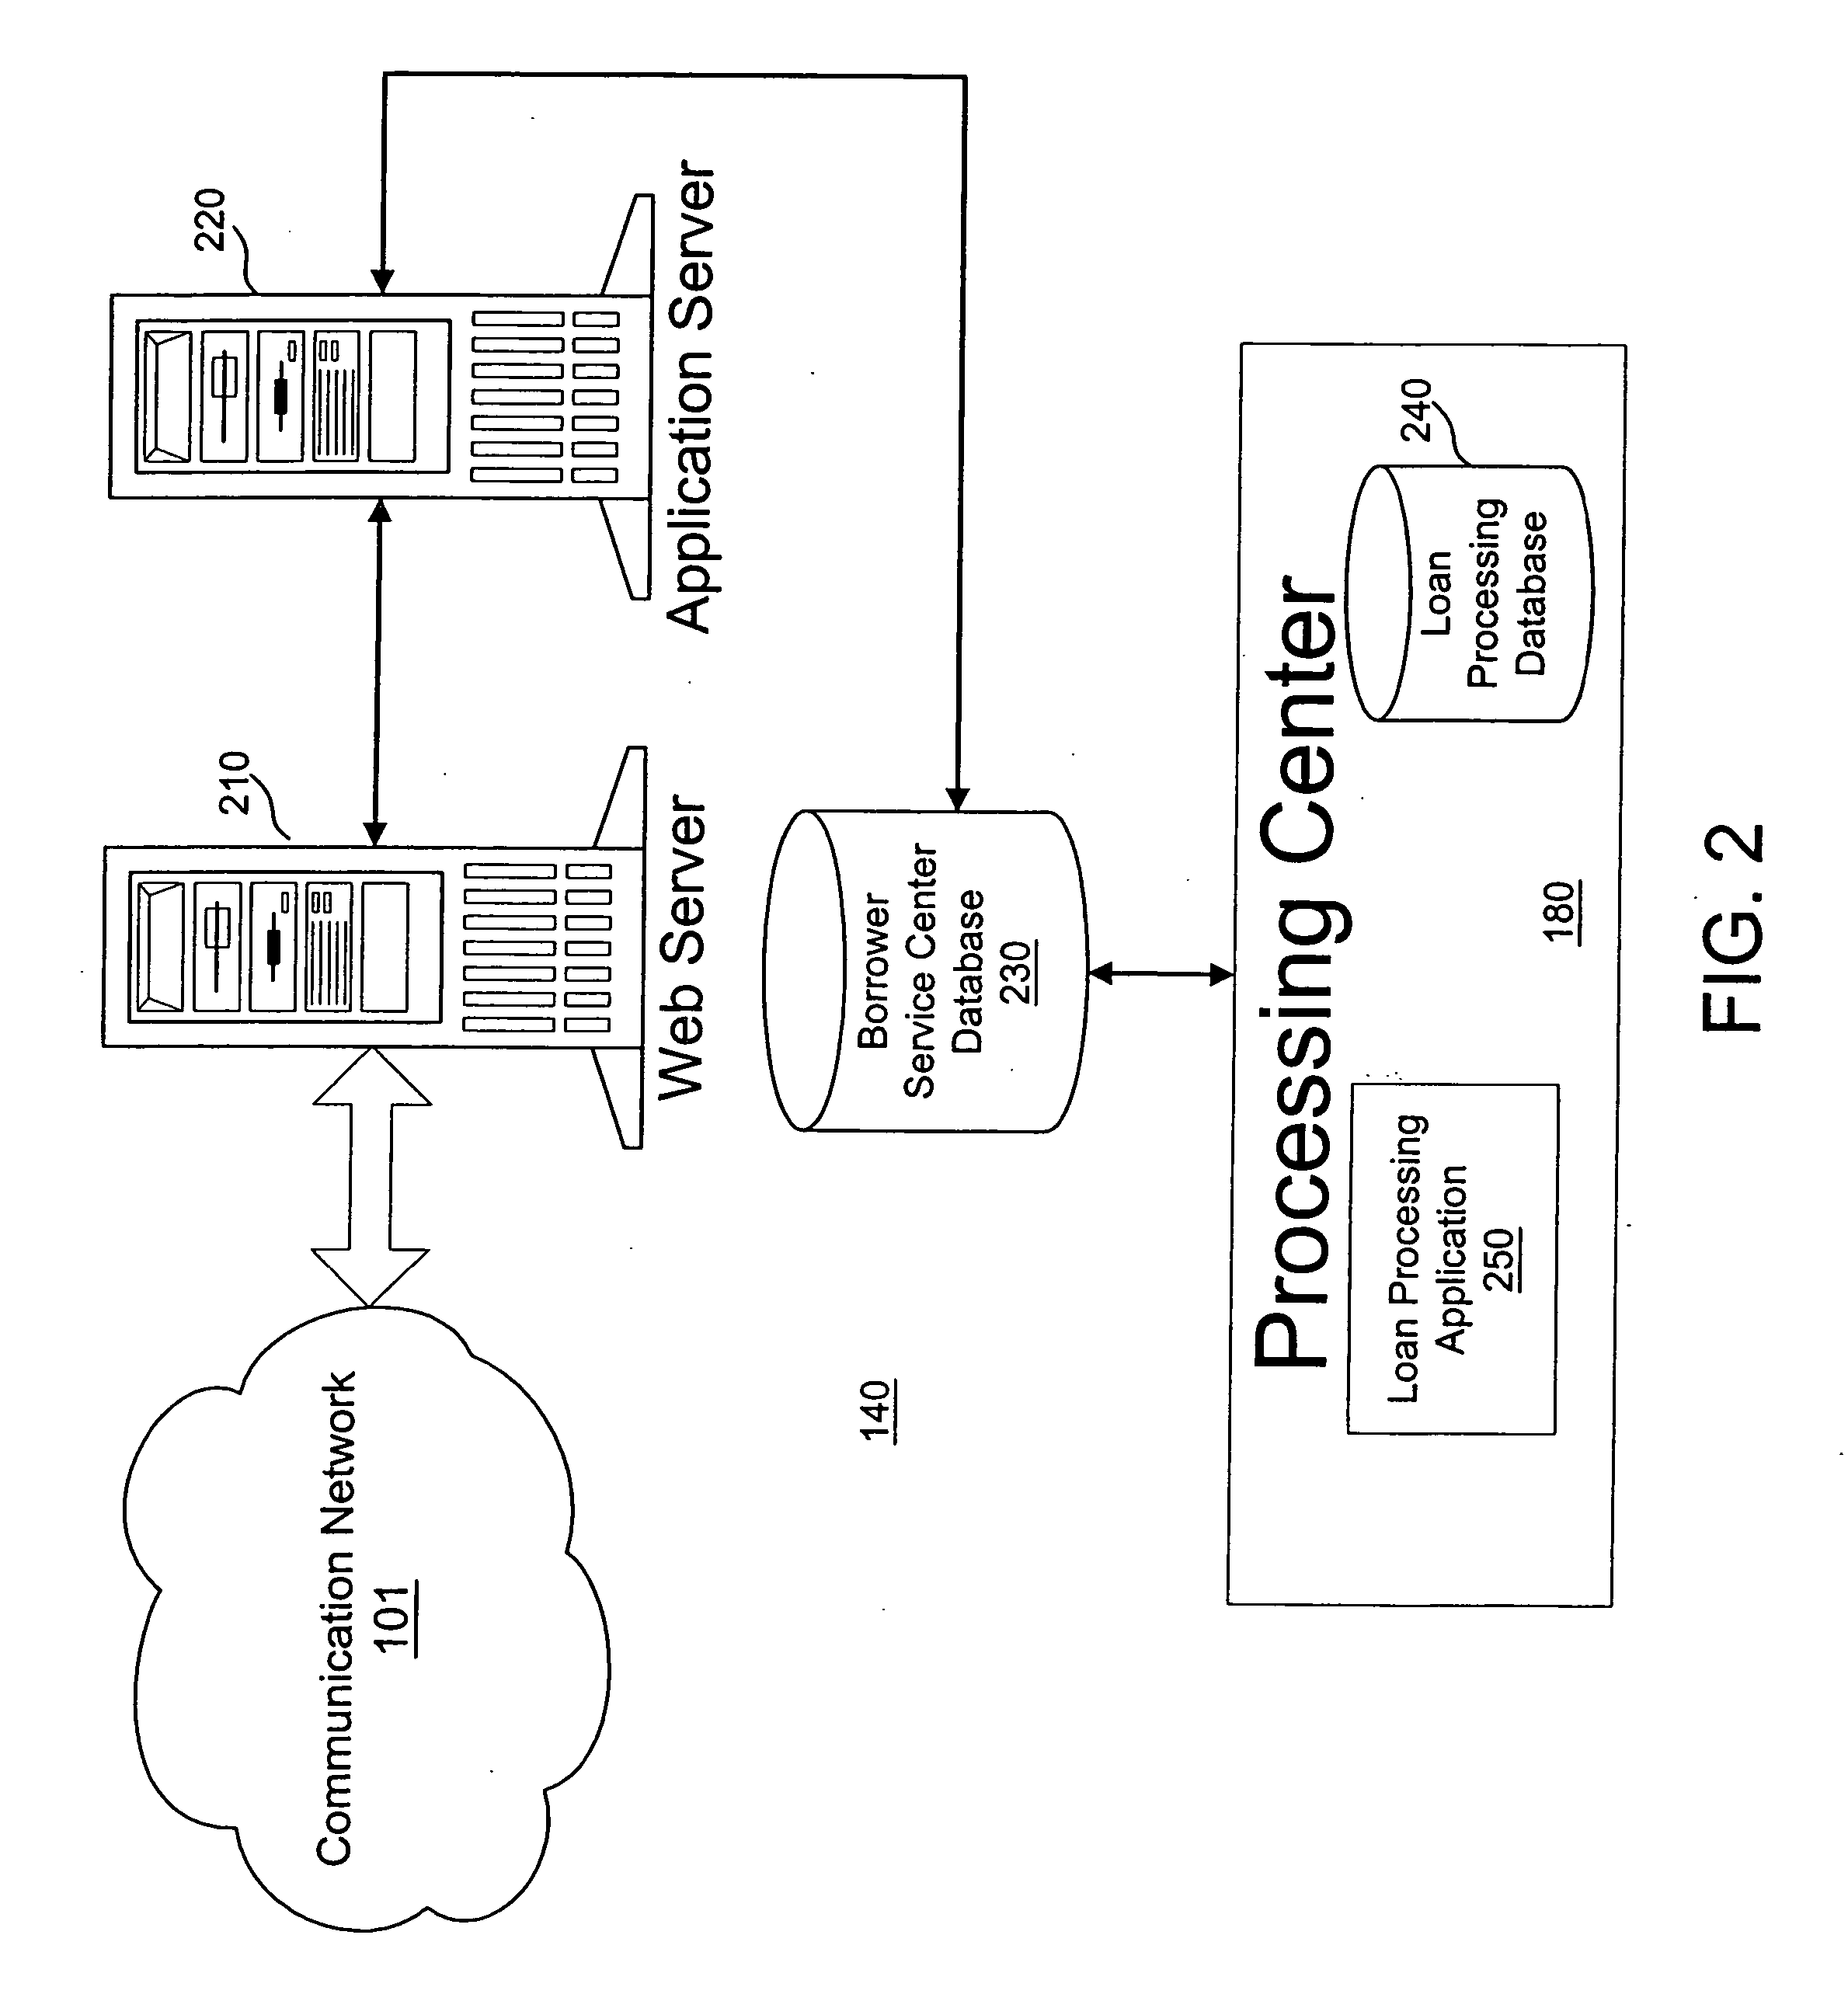 System and method for facilitating realtor-assisted loan shopping and origination